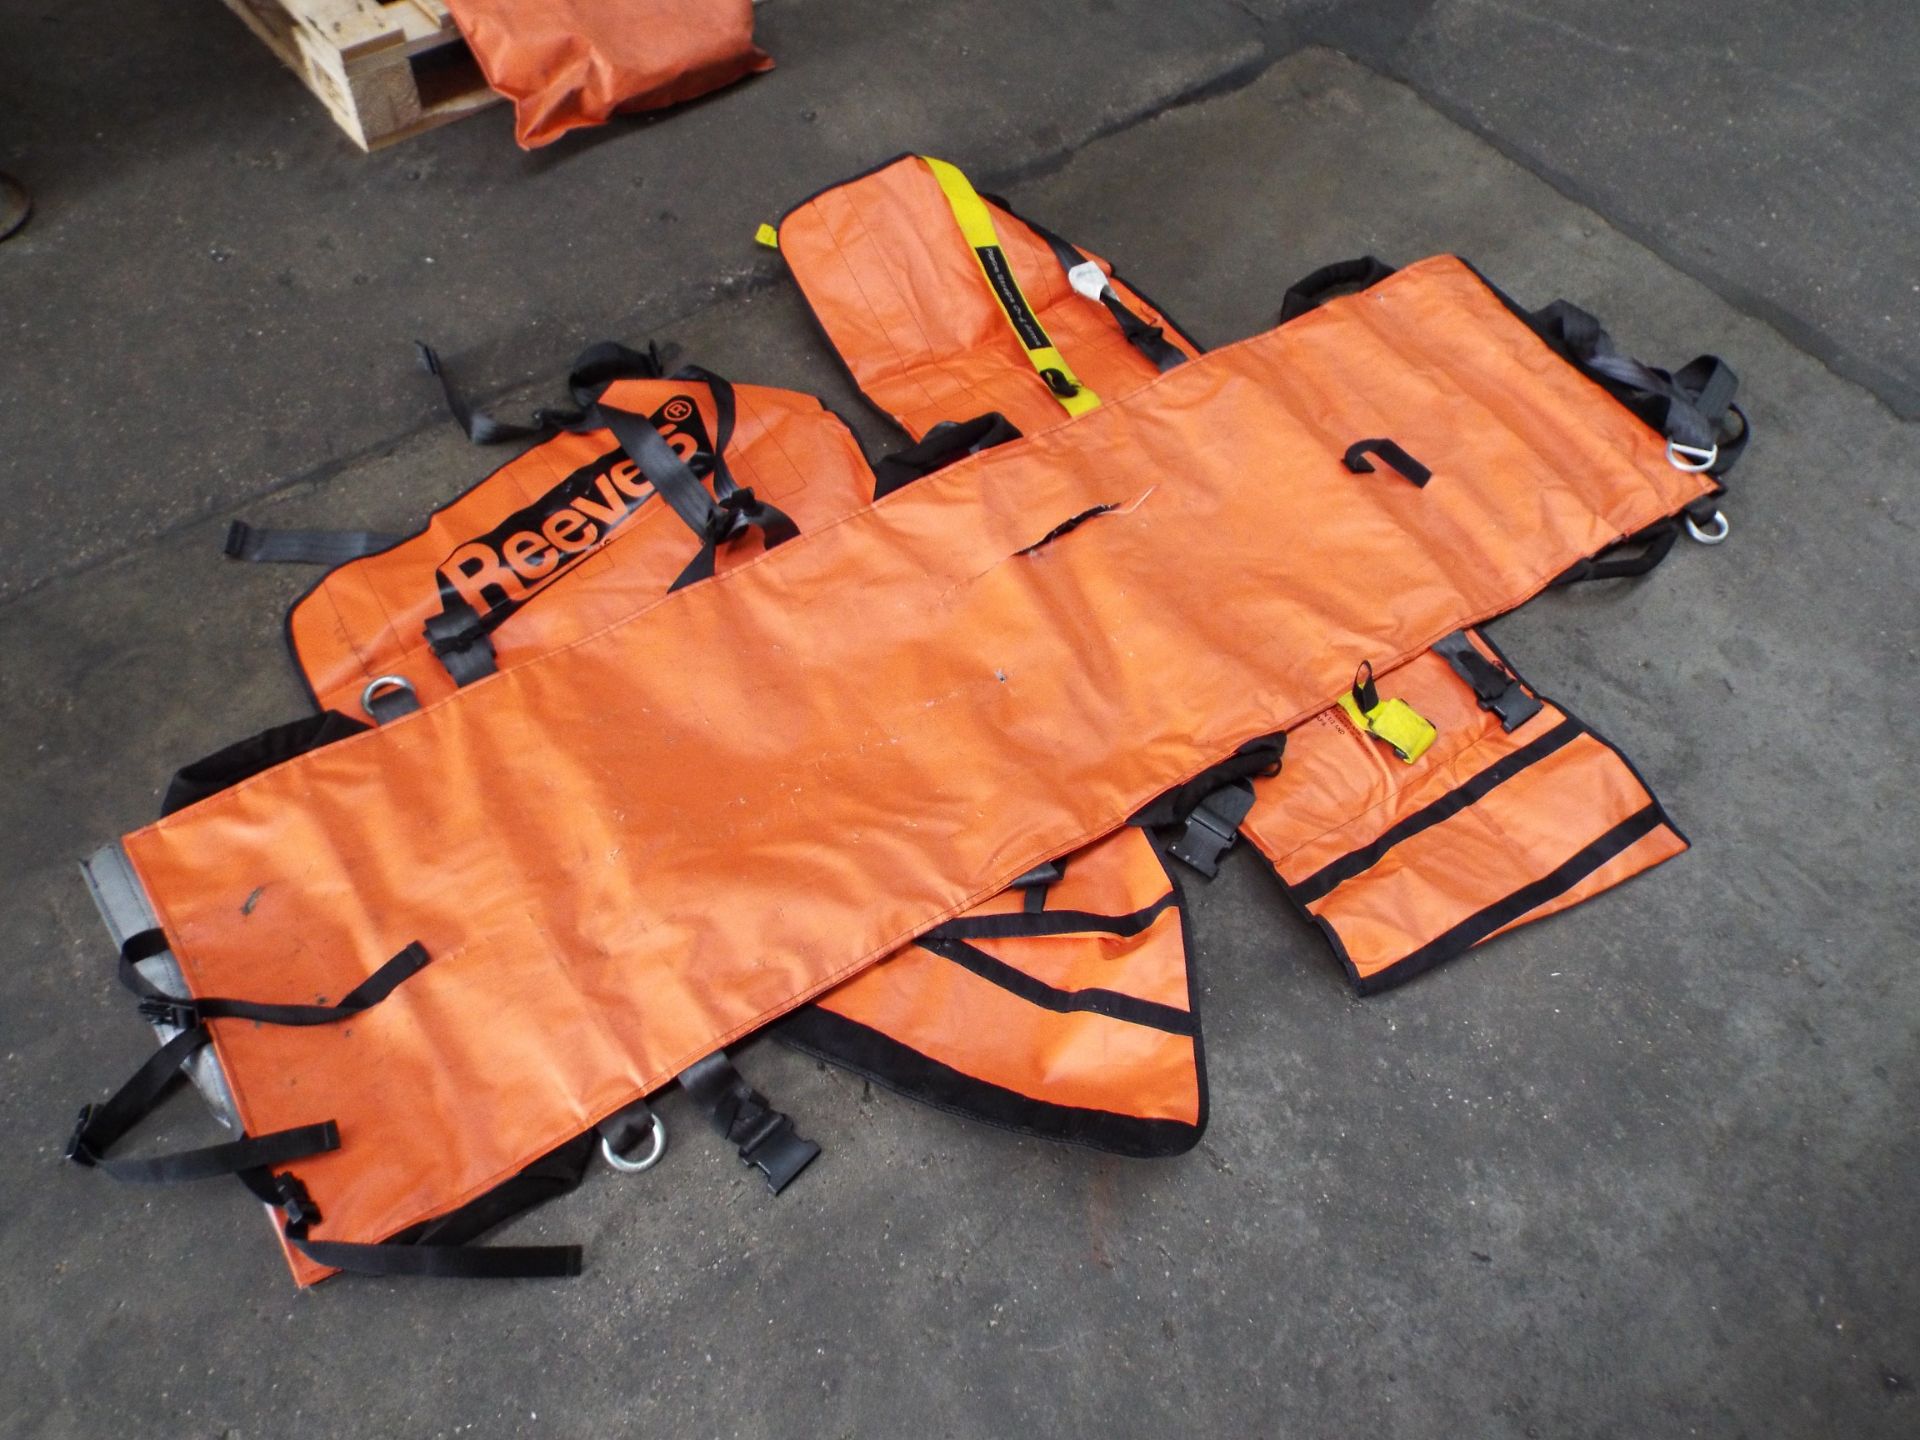 Reeves EMS Immobilization Stretcher - Image 5 of 6